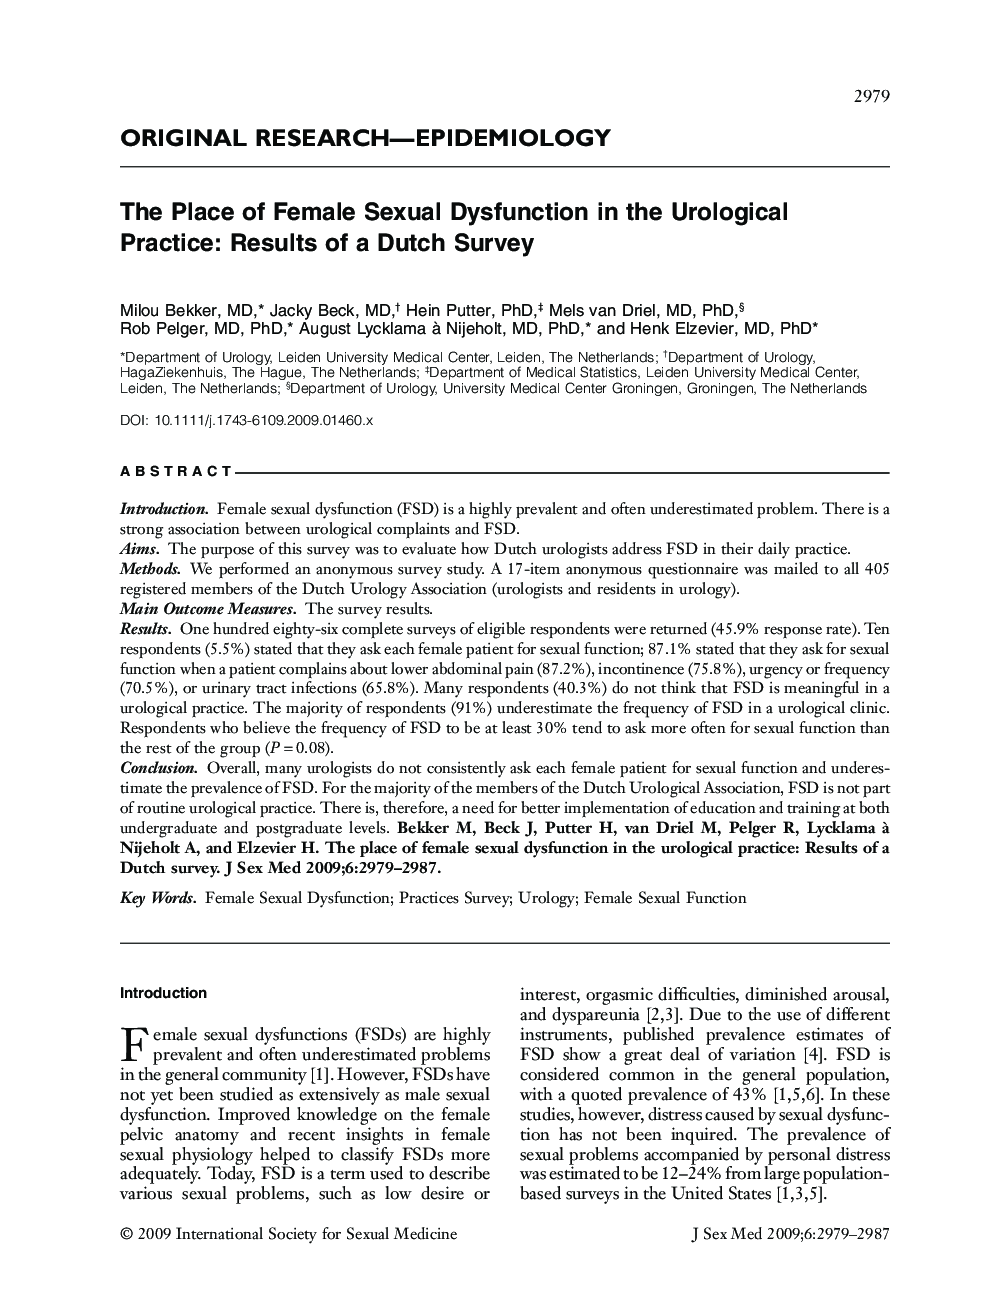 The Place of Female Sexual Dysfunction in the Urological Practice: Results of a Dutch Survey